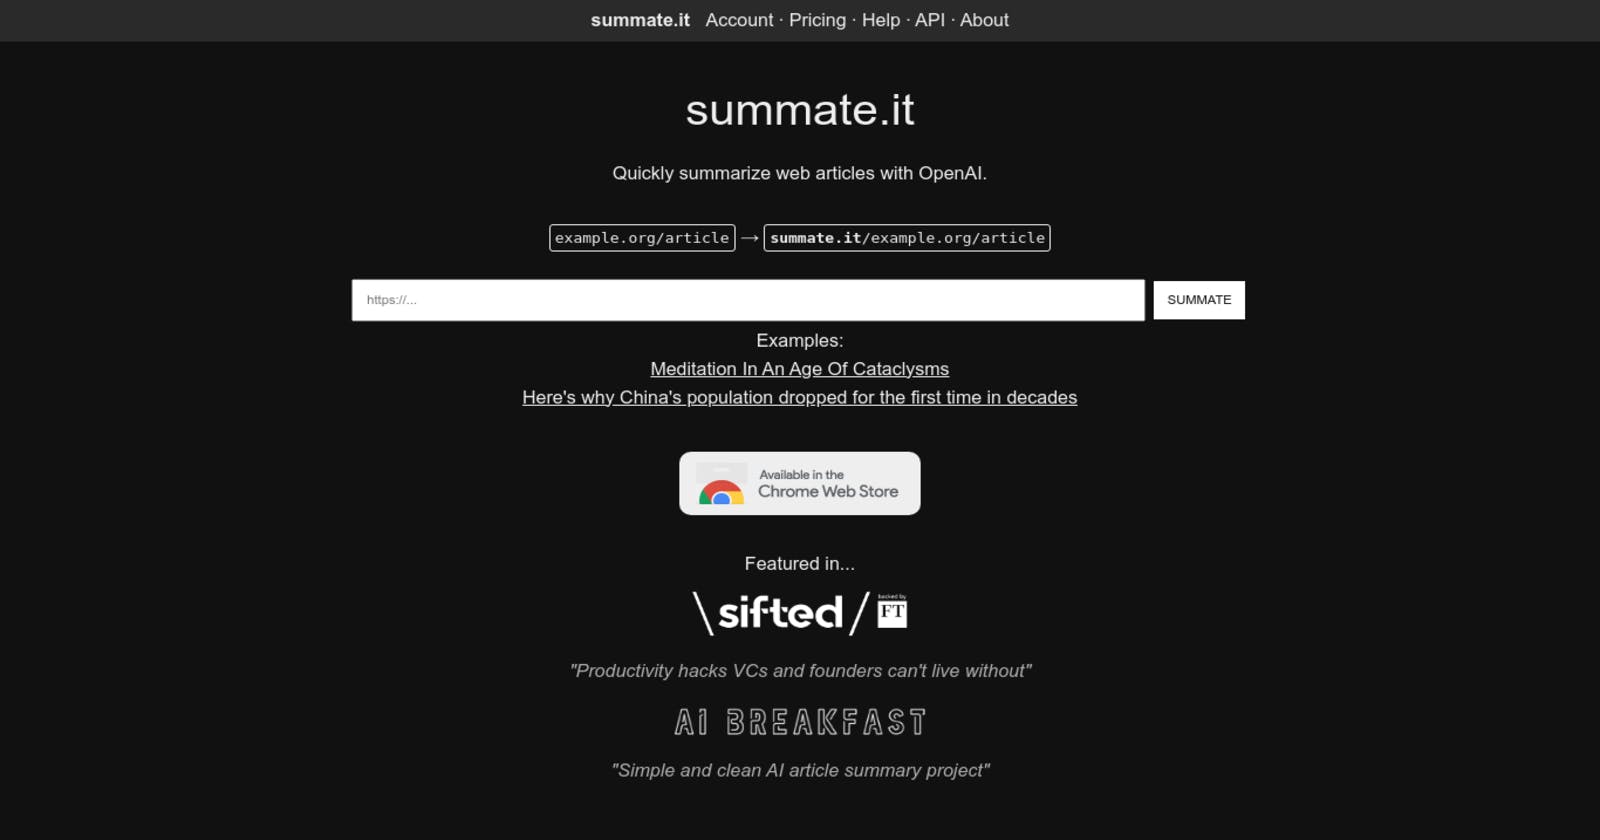 Revolutionize Your Research with Summate.it - AI-Powered Article Summarization